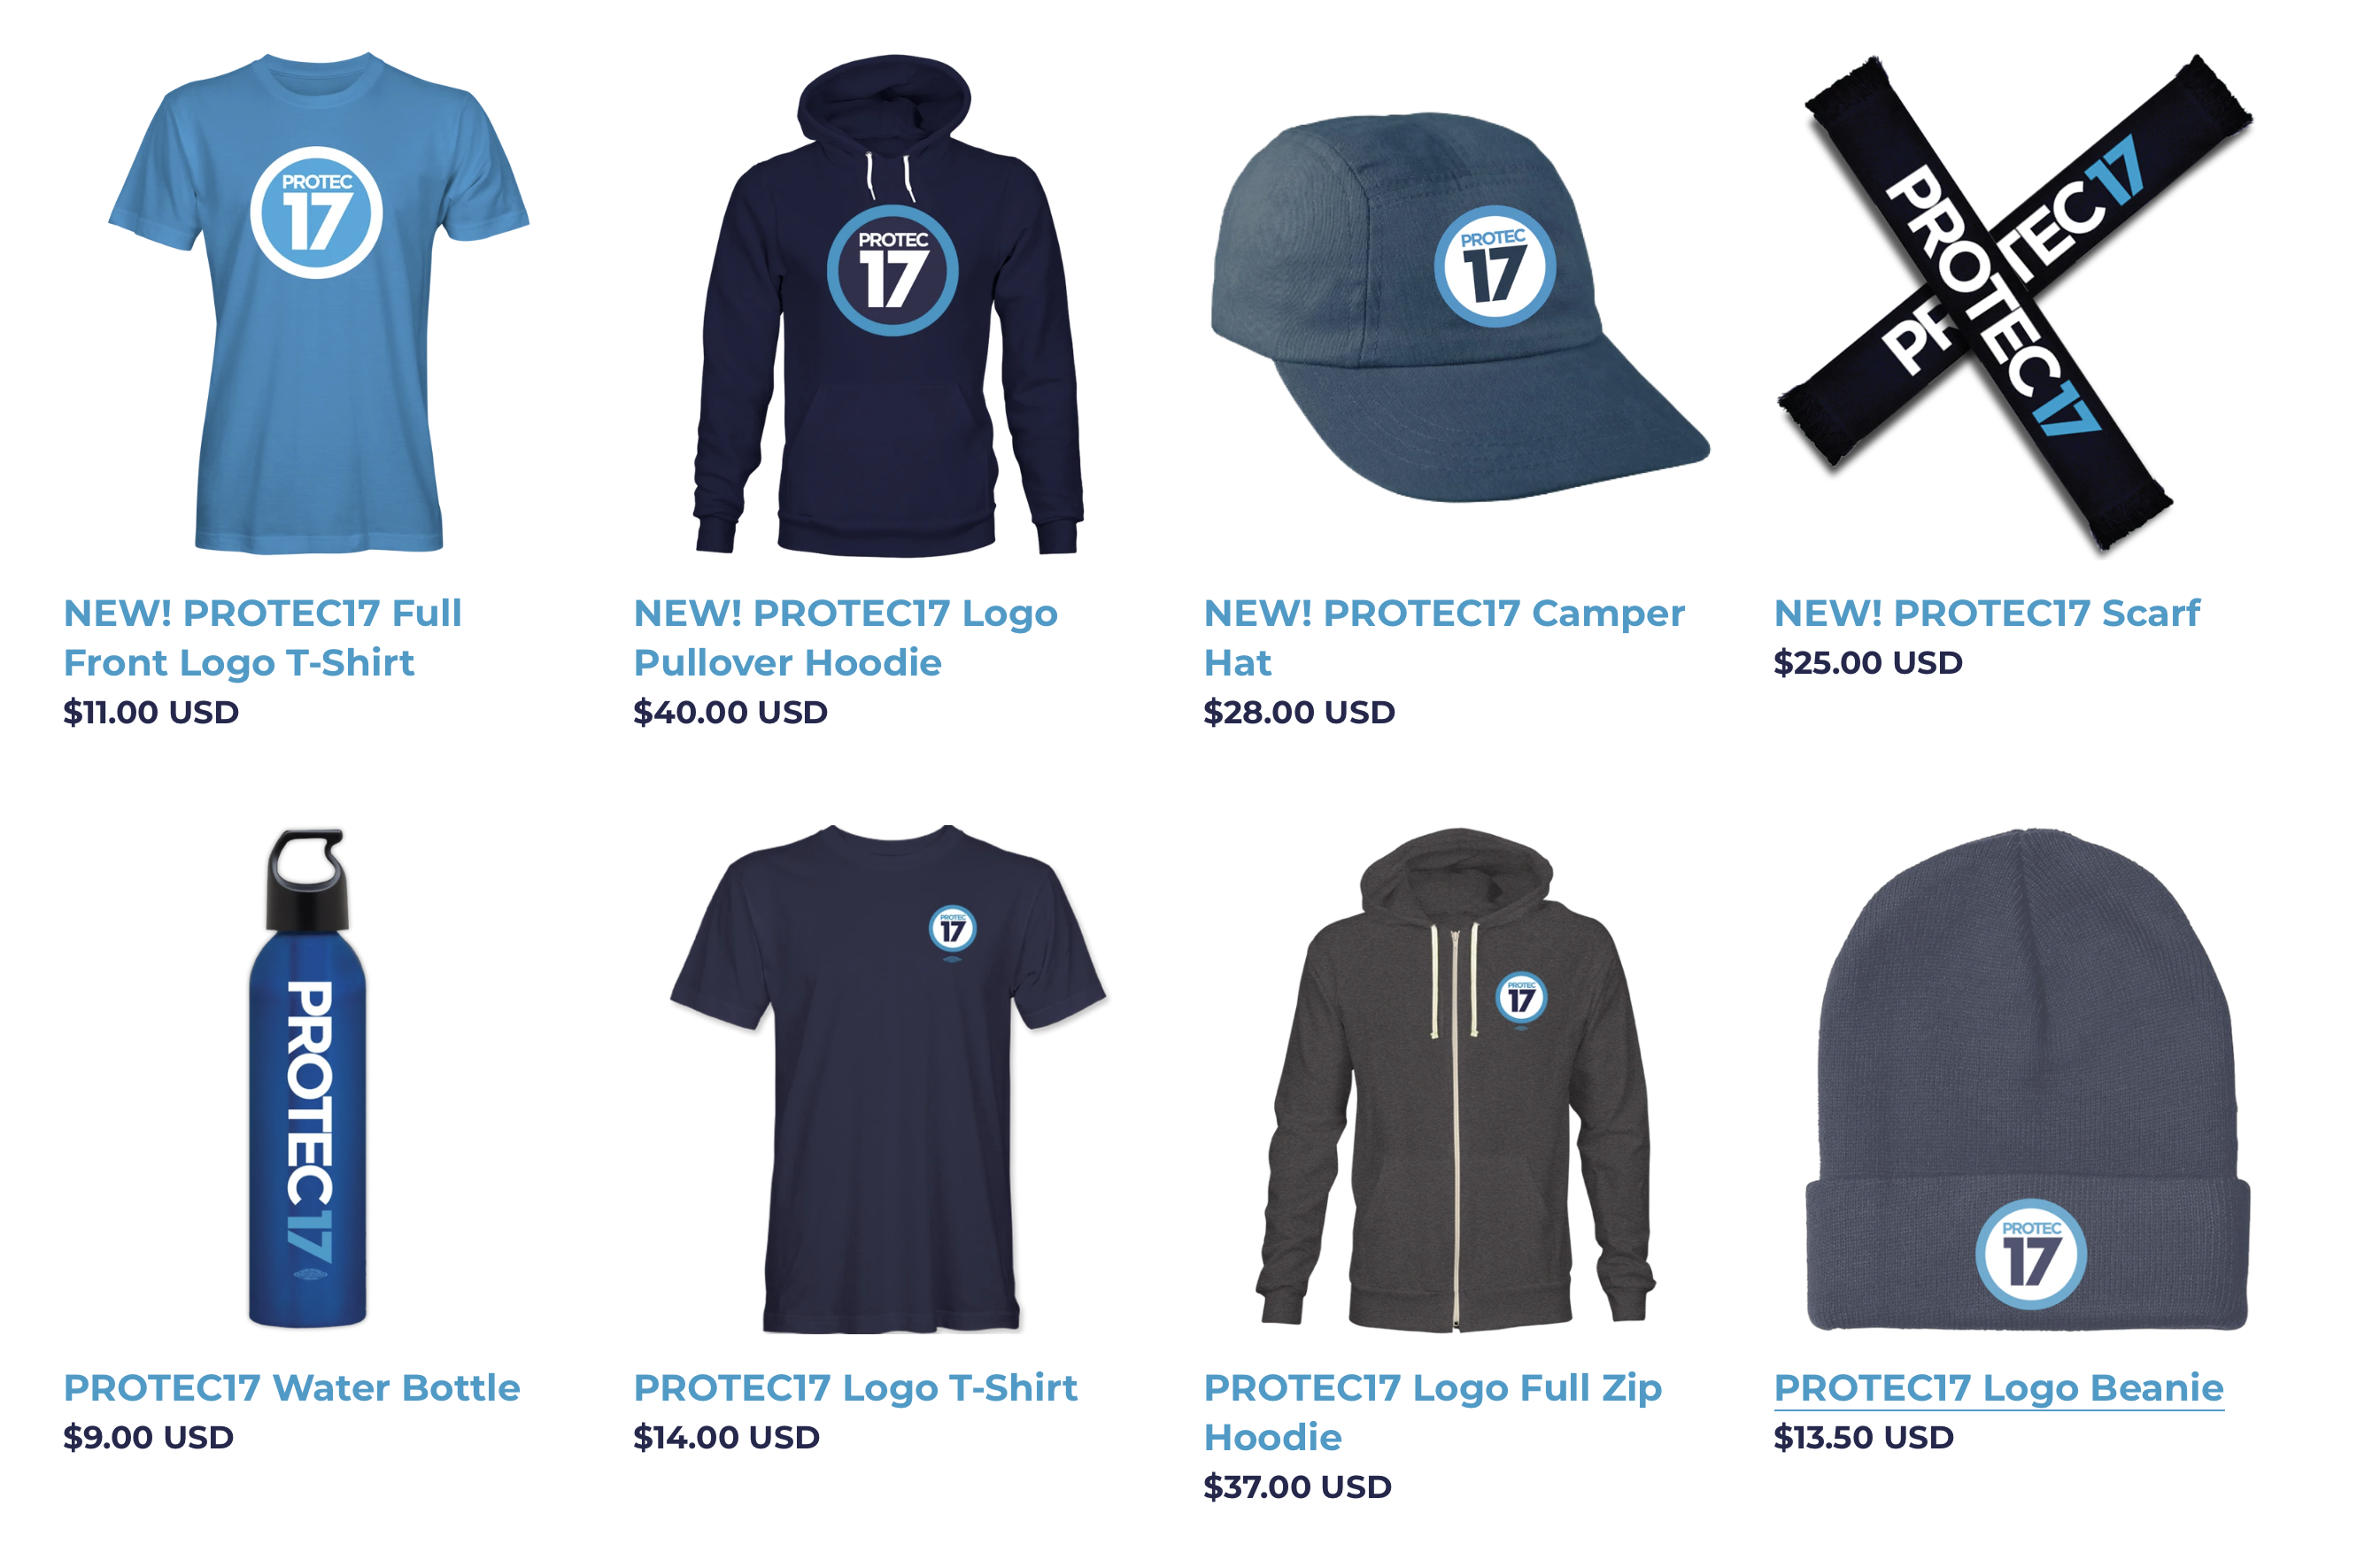 New PROTEC17 swag 20% OFF through March 7! - PROTEC17